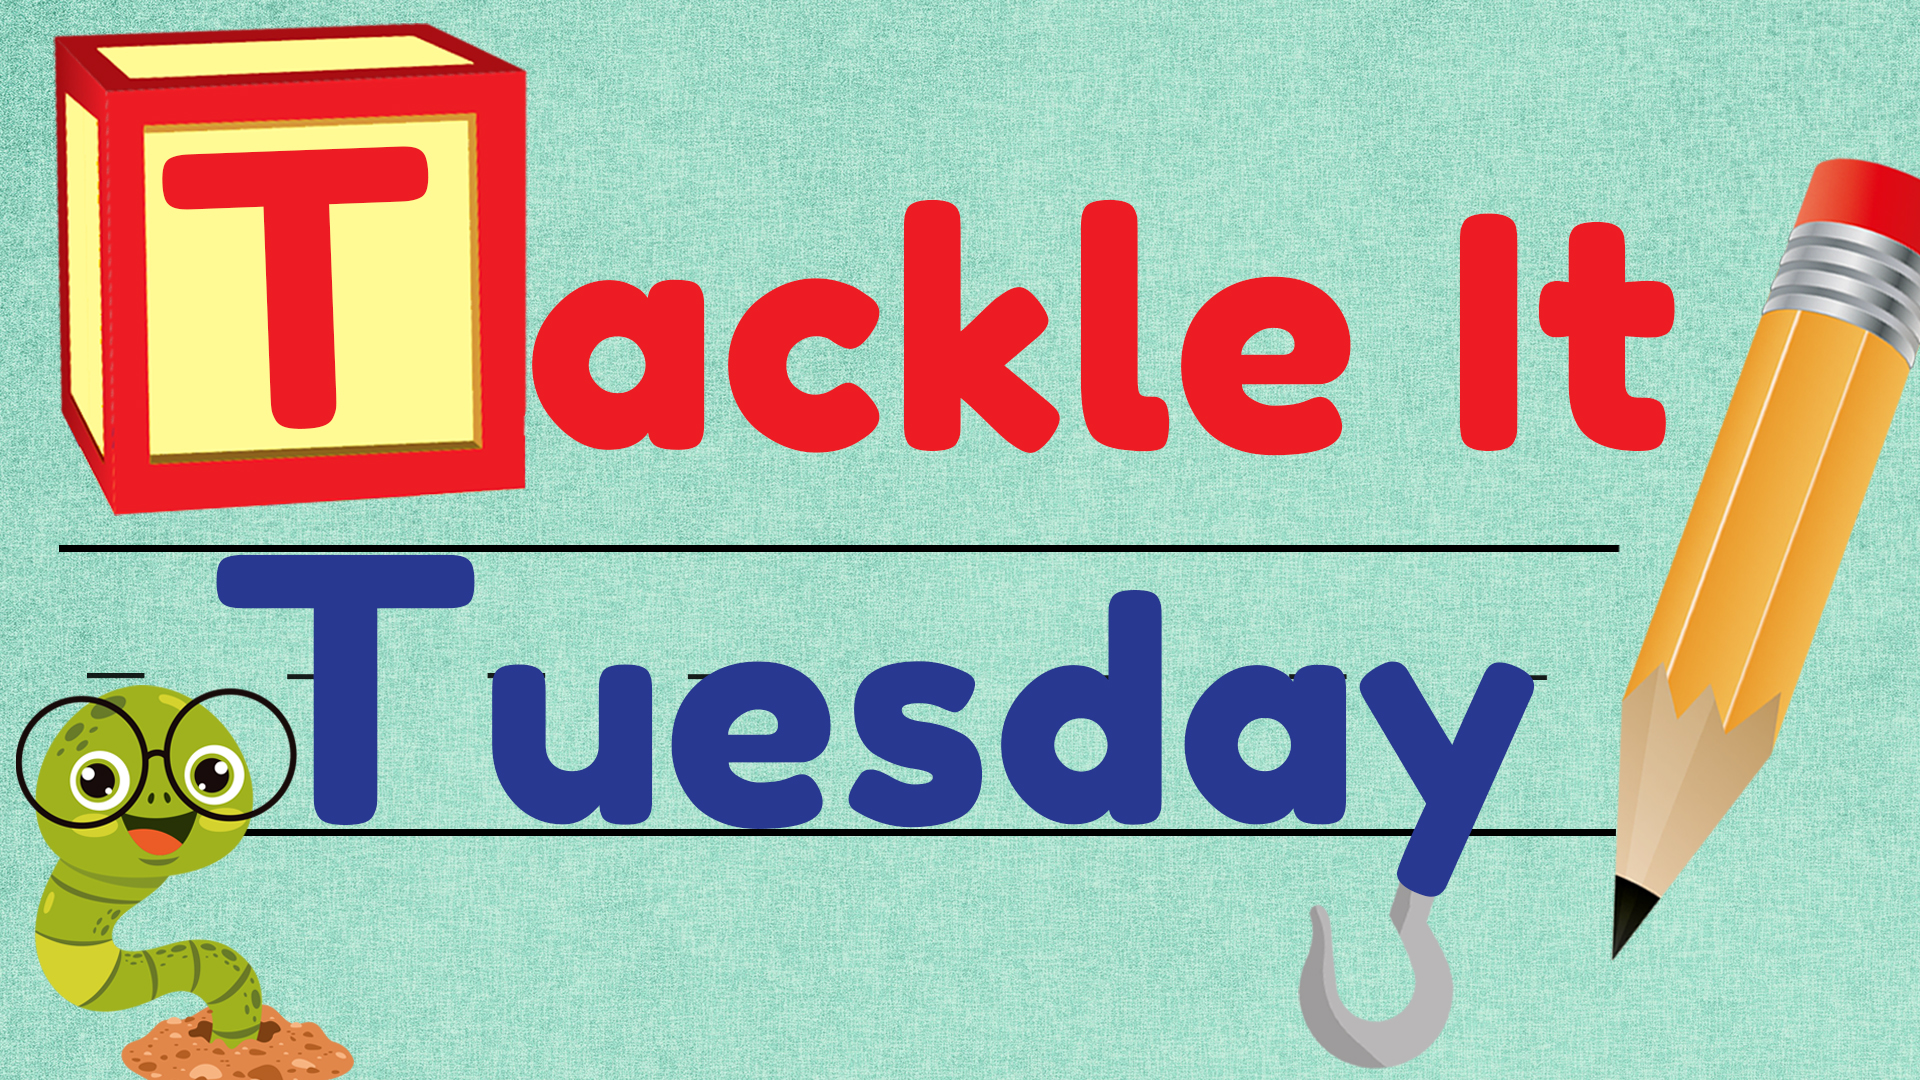 Image reads "Tackle It Tuesday" against a textured background. A bookworm is to the bottom left of the title and a pencil is to the right of the title. "Tackle It" is in red and "Tuesday" is in blue. A rounded hook is connected to the "y" in "Tuesday".